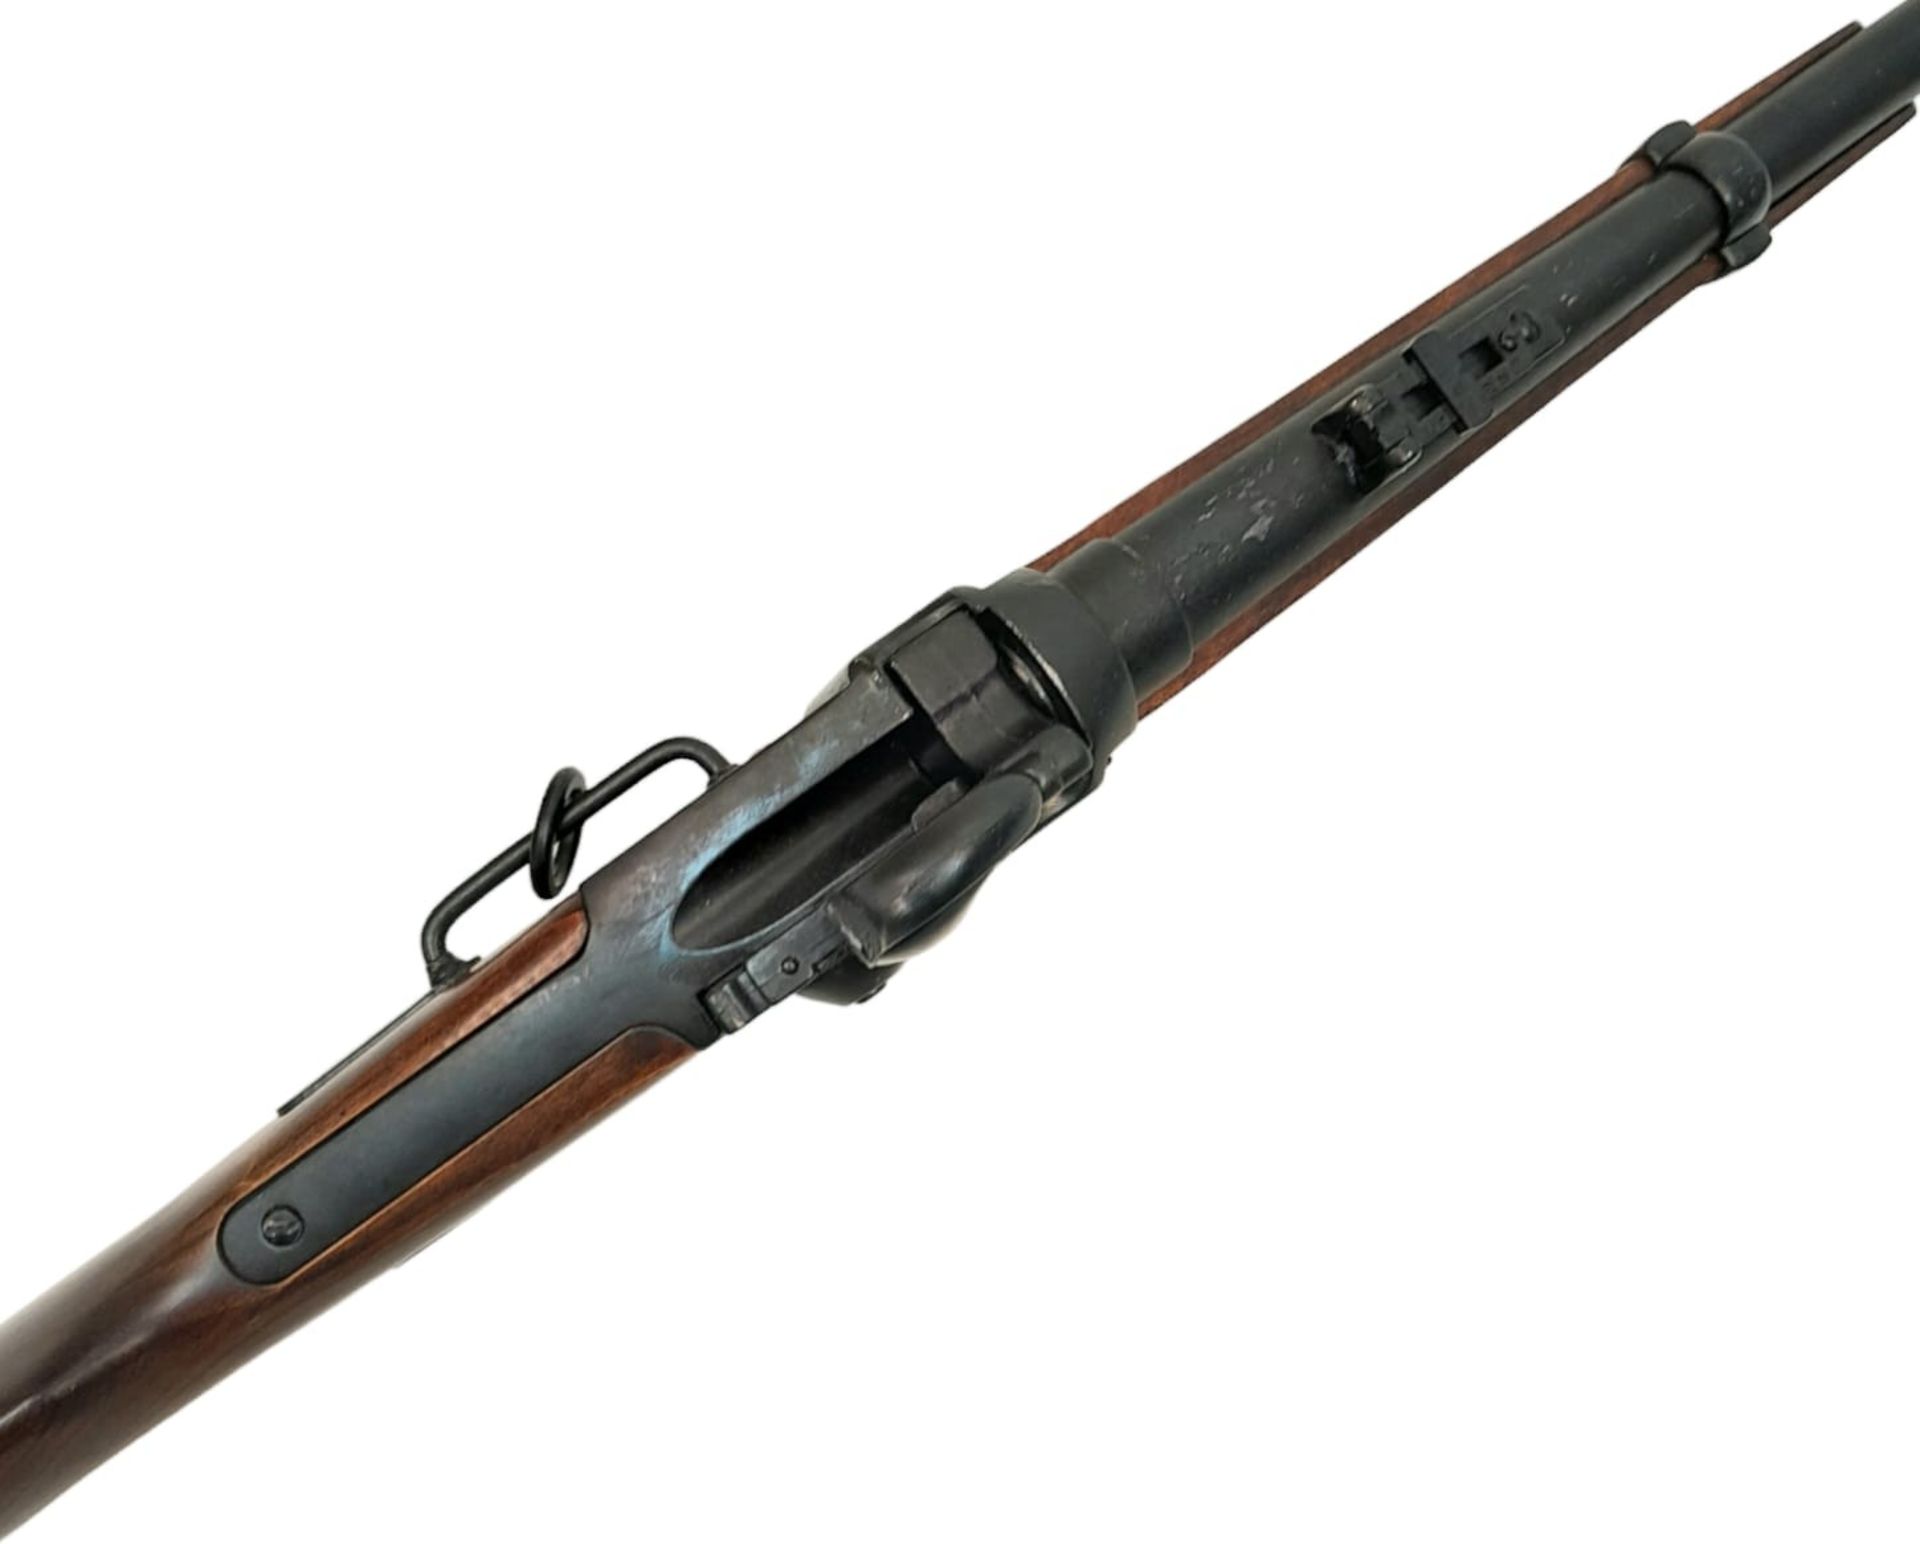 A Vintage, Full Weight and Size, Retrospective Inert Replica of an 1859 Carbine Rifle. Wood and - Image 4 of 11